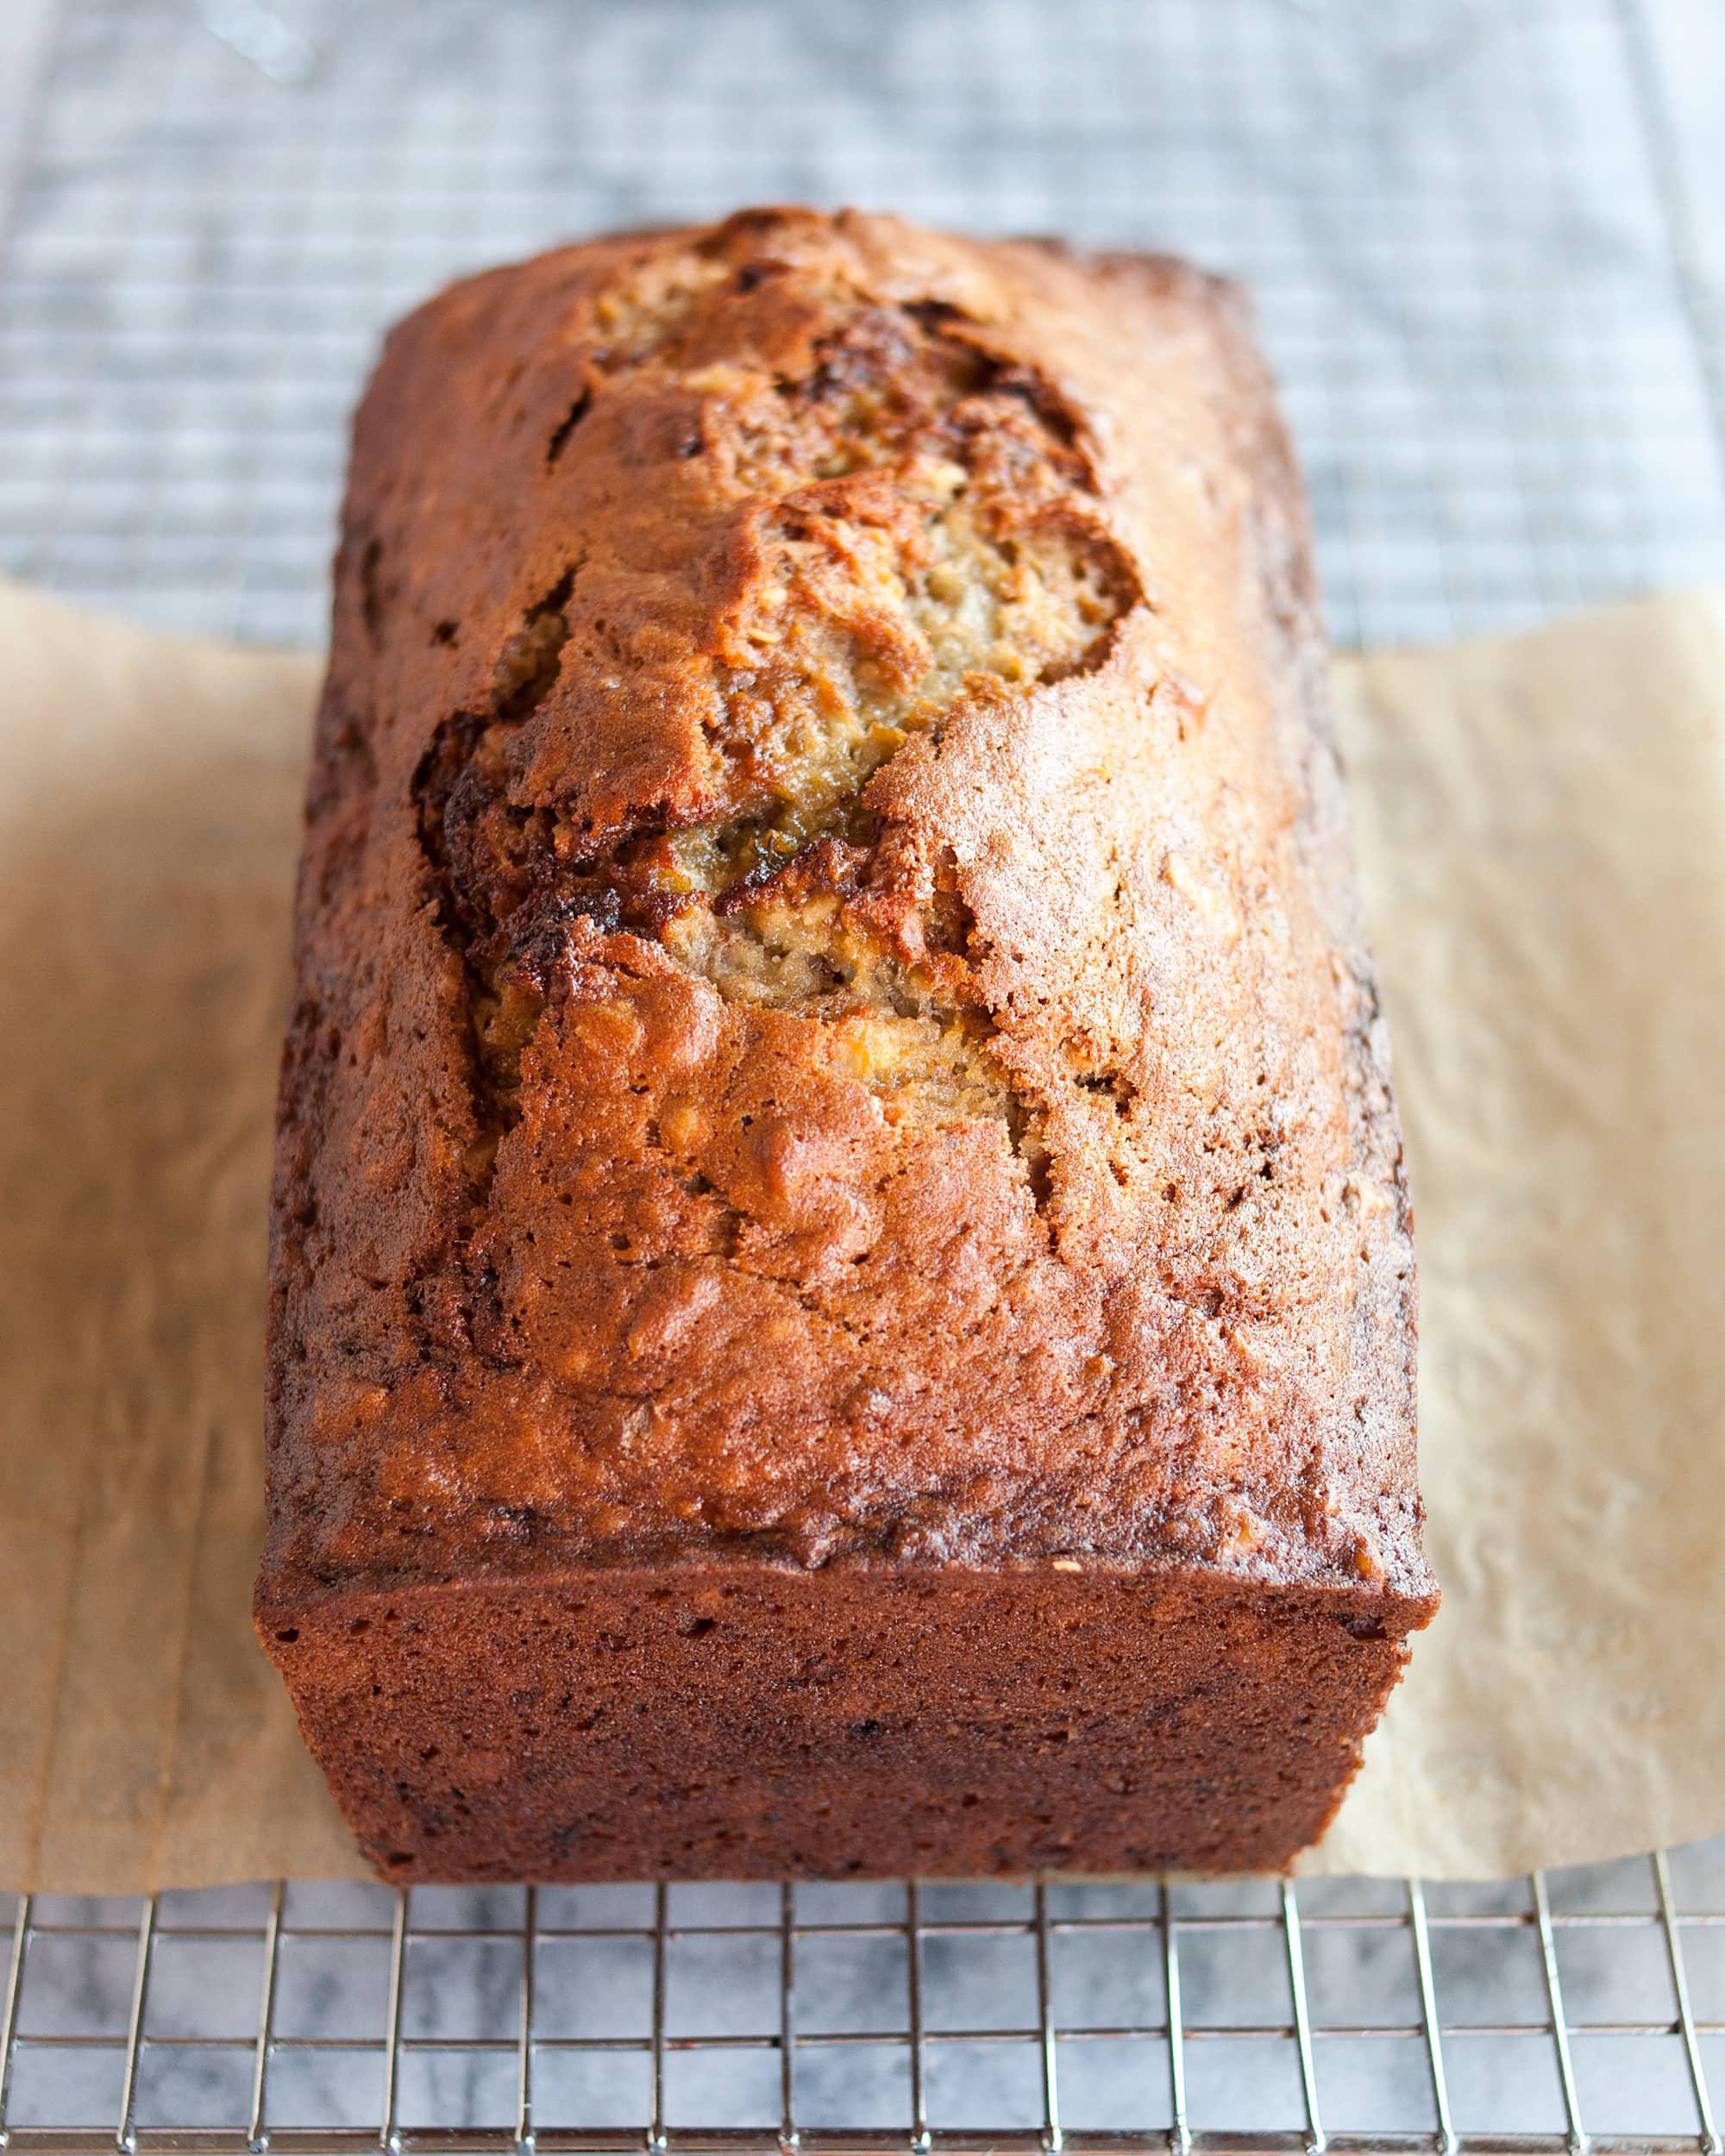 How To Make Banana Bread: The Simplest, Easiest Recipe | Kitchn